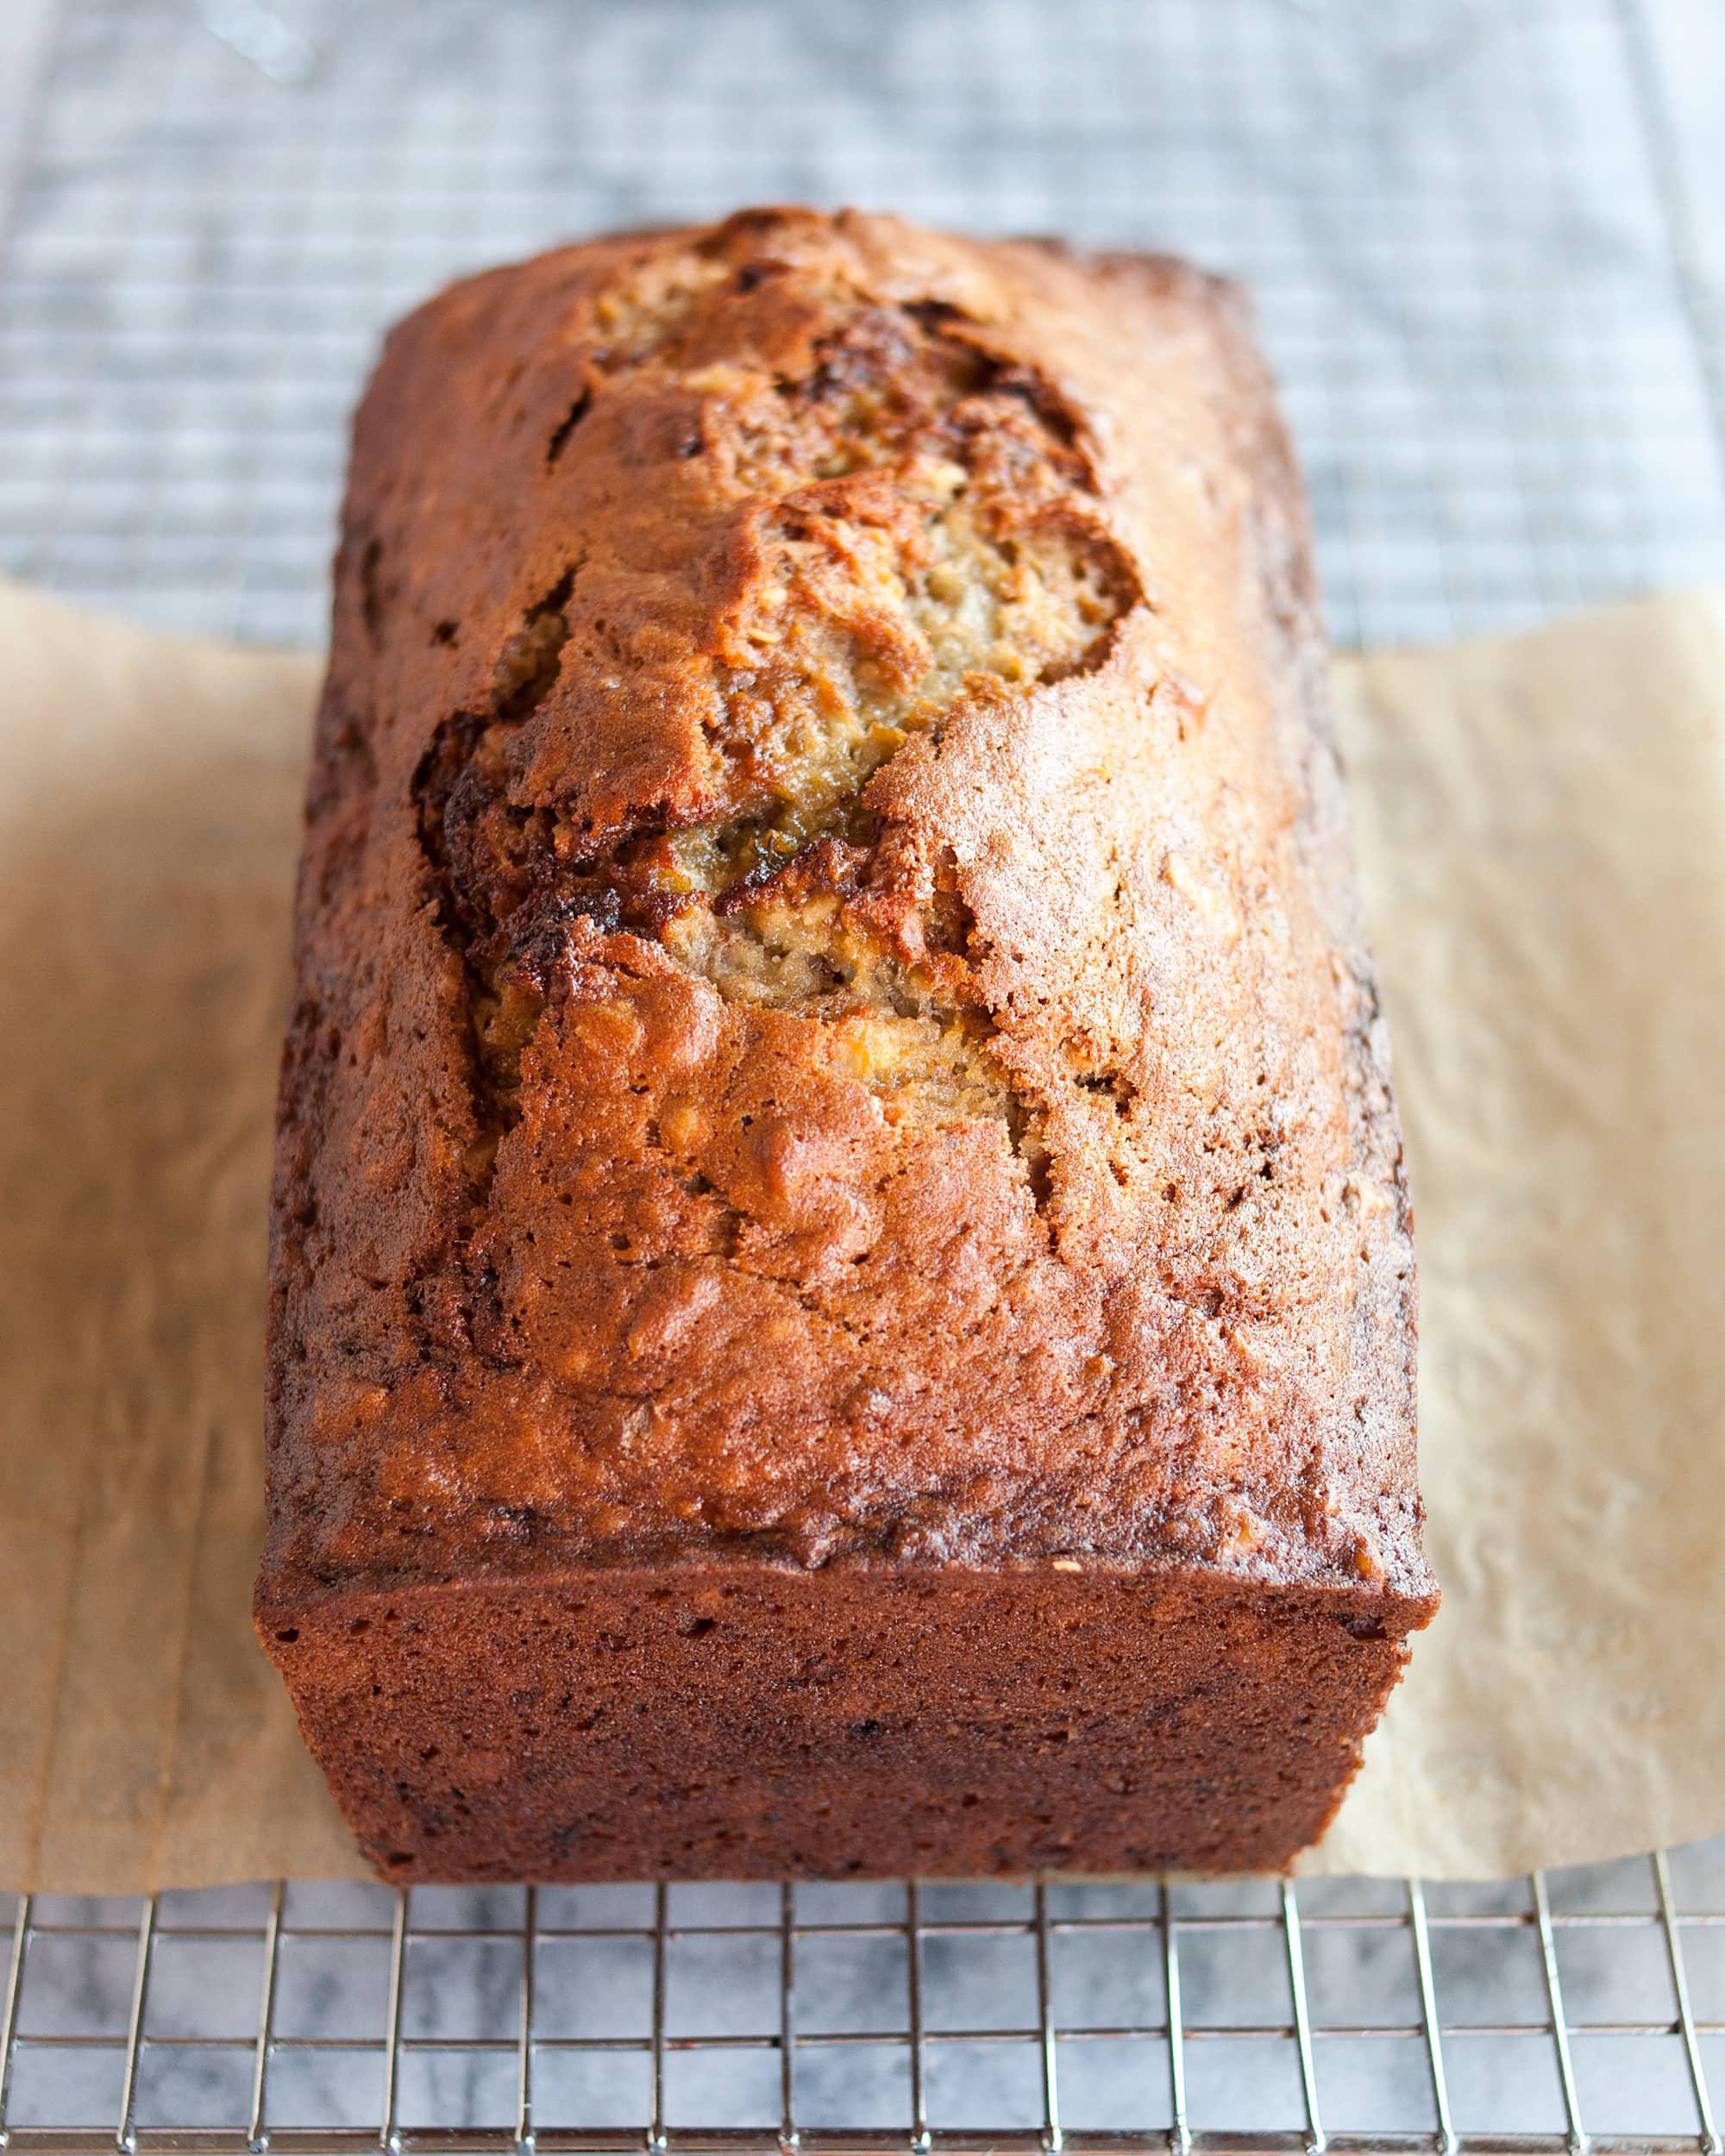 How To Make Banana Bread: The Simplest, Easiest Recipe | Kitchn